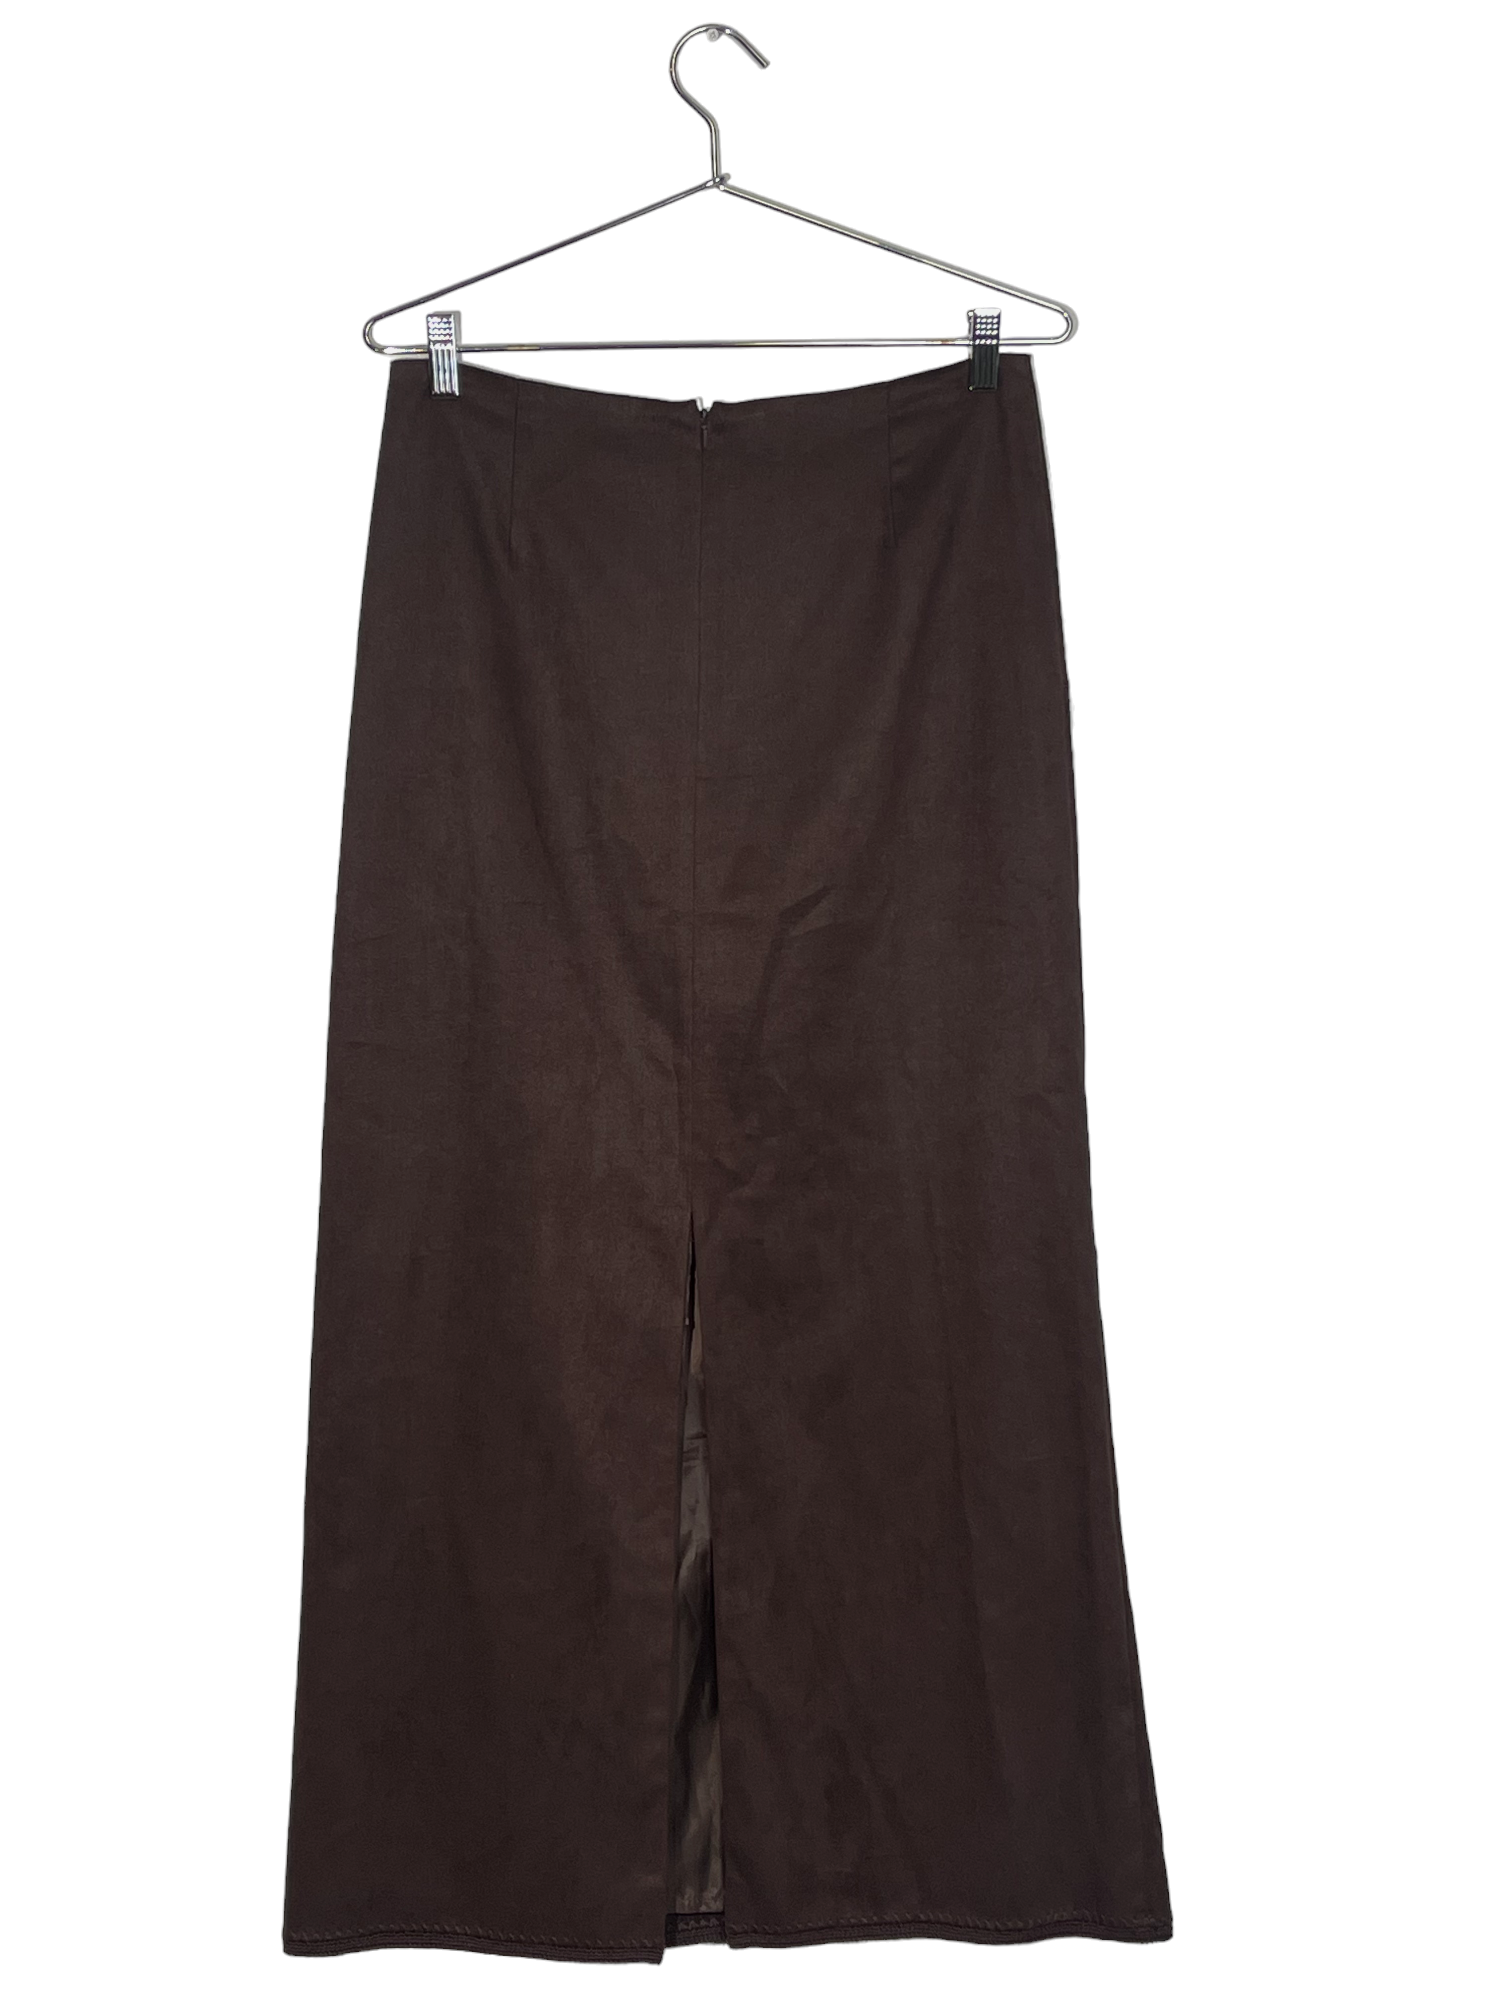 Brown Suede Maxi Skirt Embroidered Detail